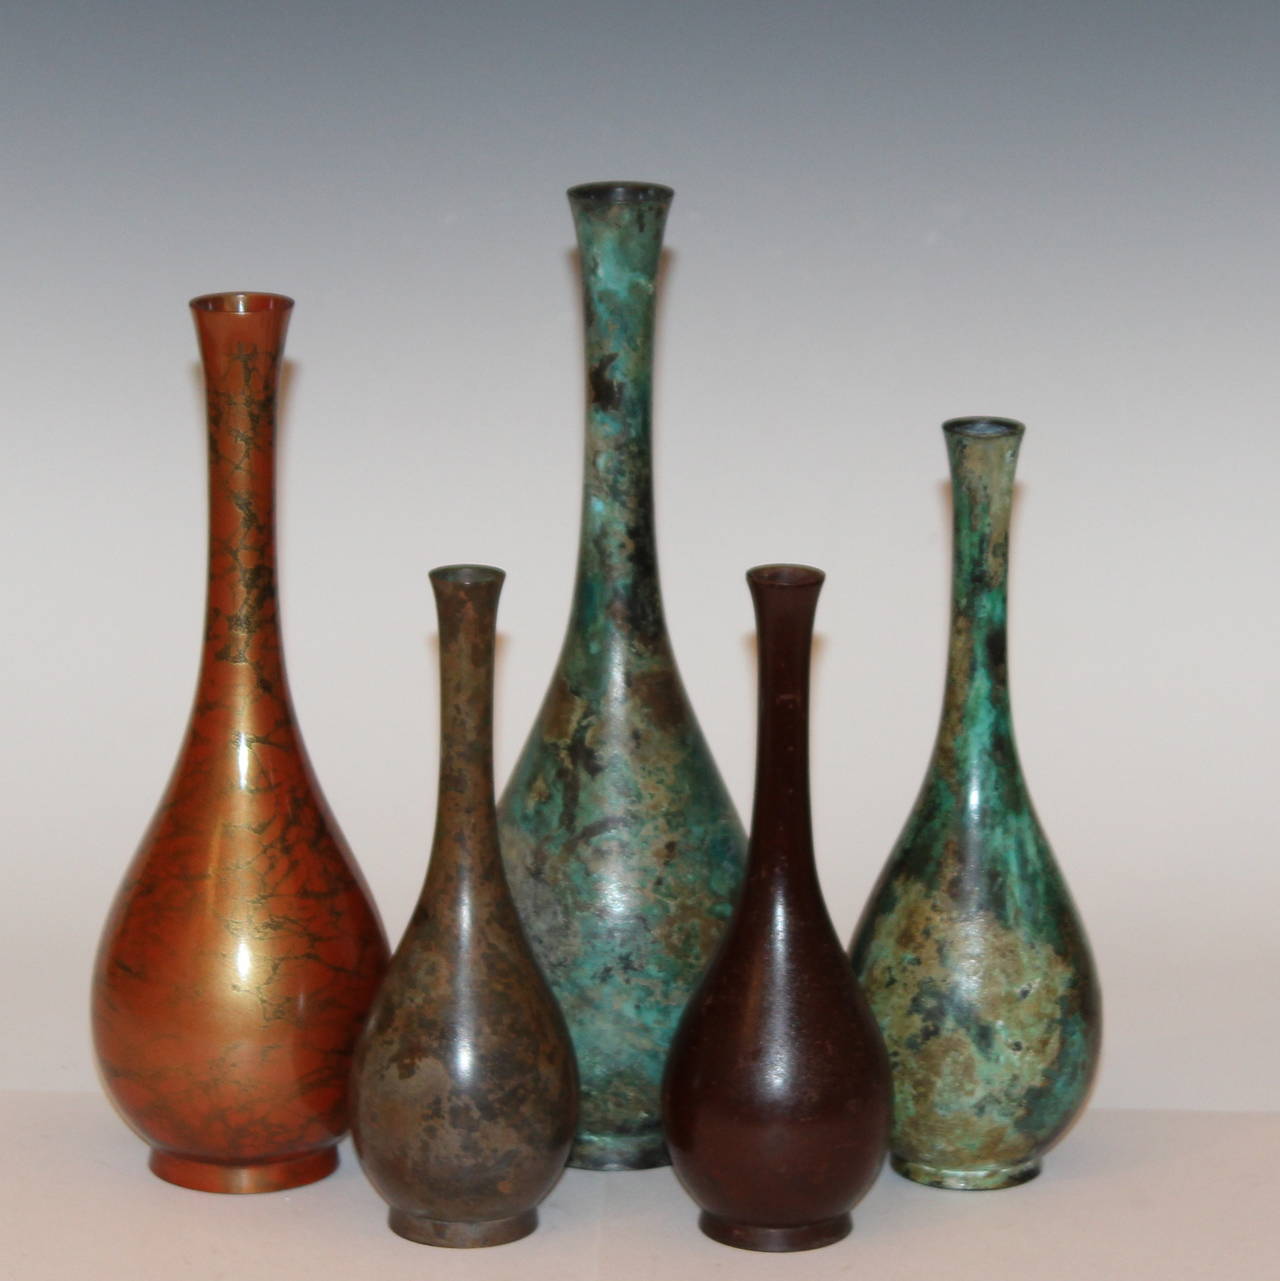 Collection of five Japanese bronze bottle vases with various colored patinas, circa mid/late 20th century. 7 3/8 to 11 inches high. Excellent condition.